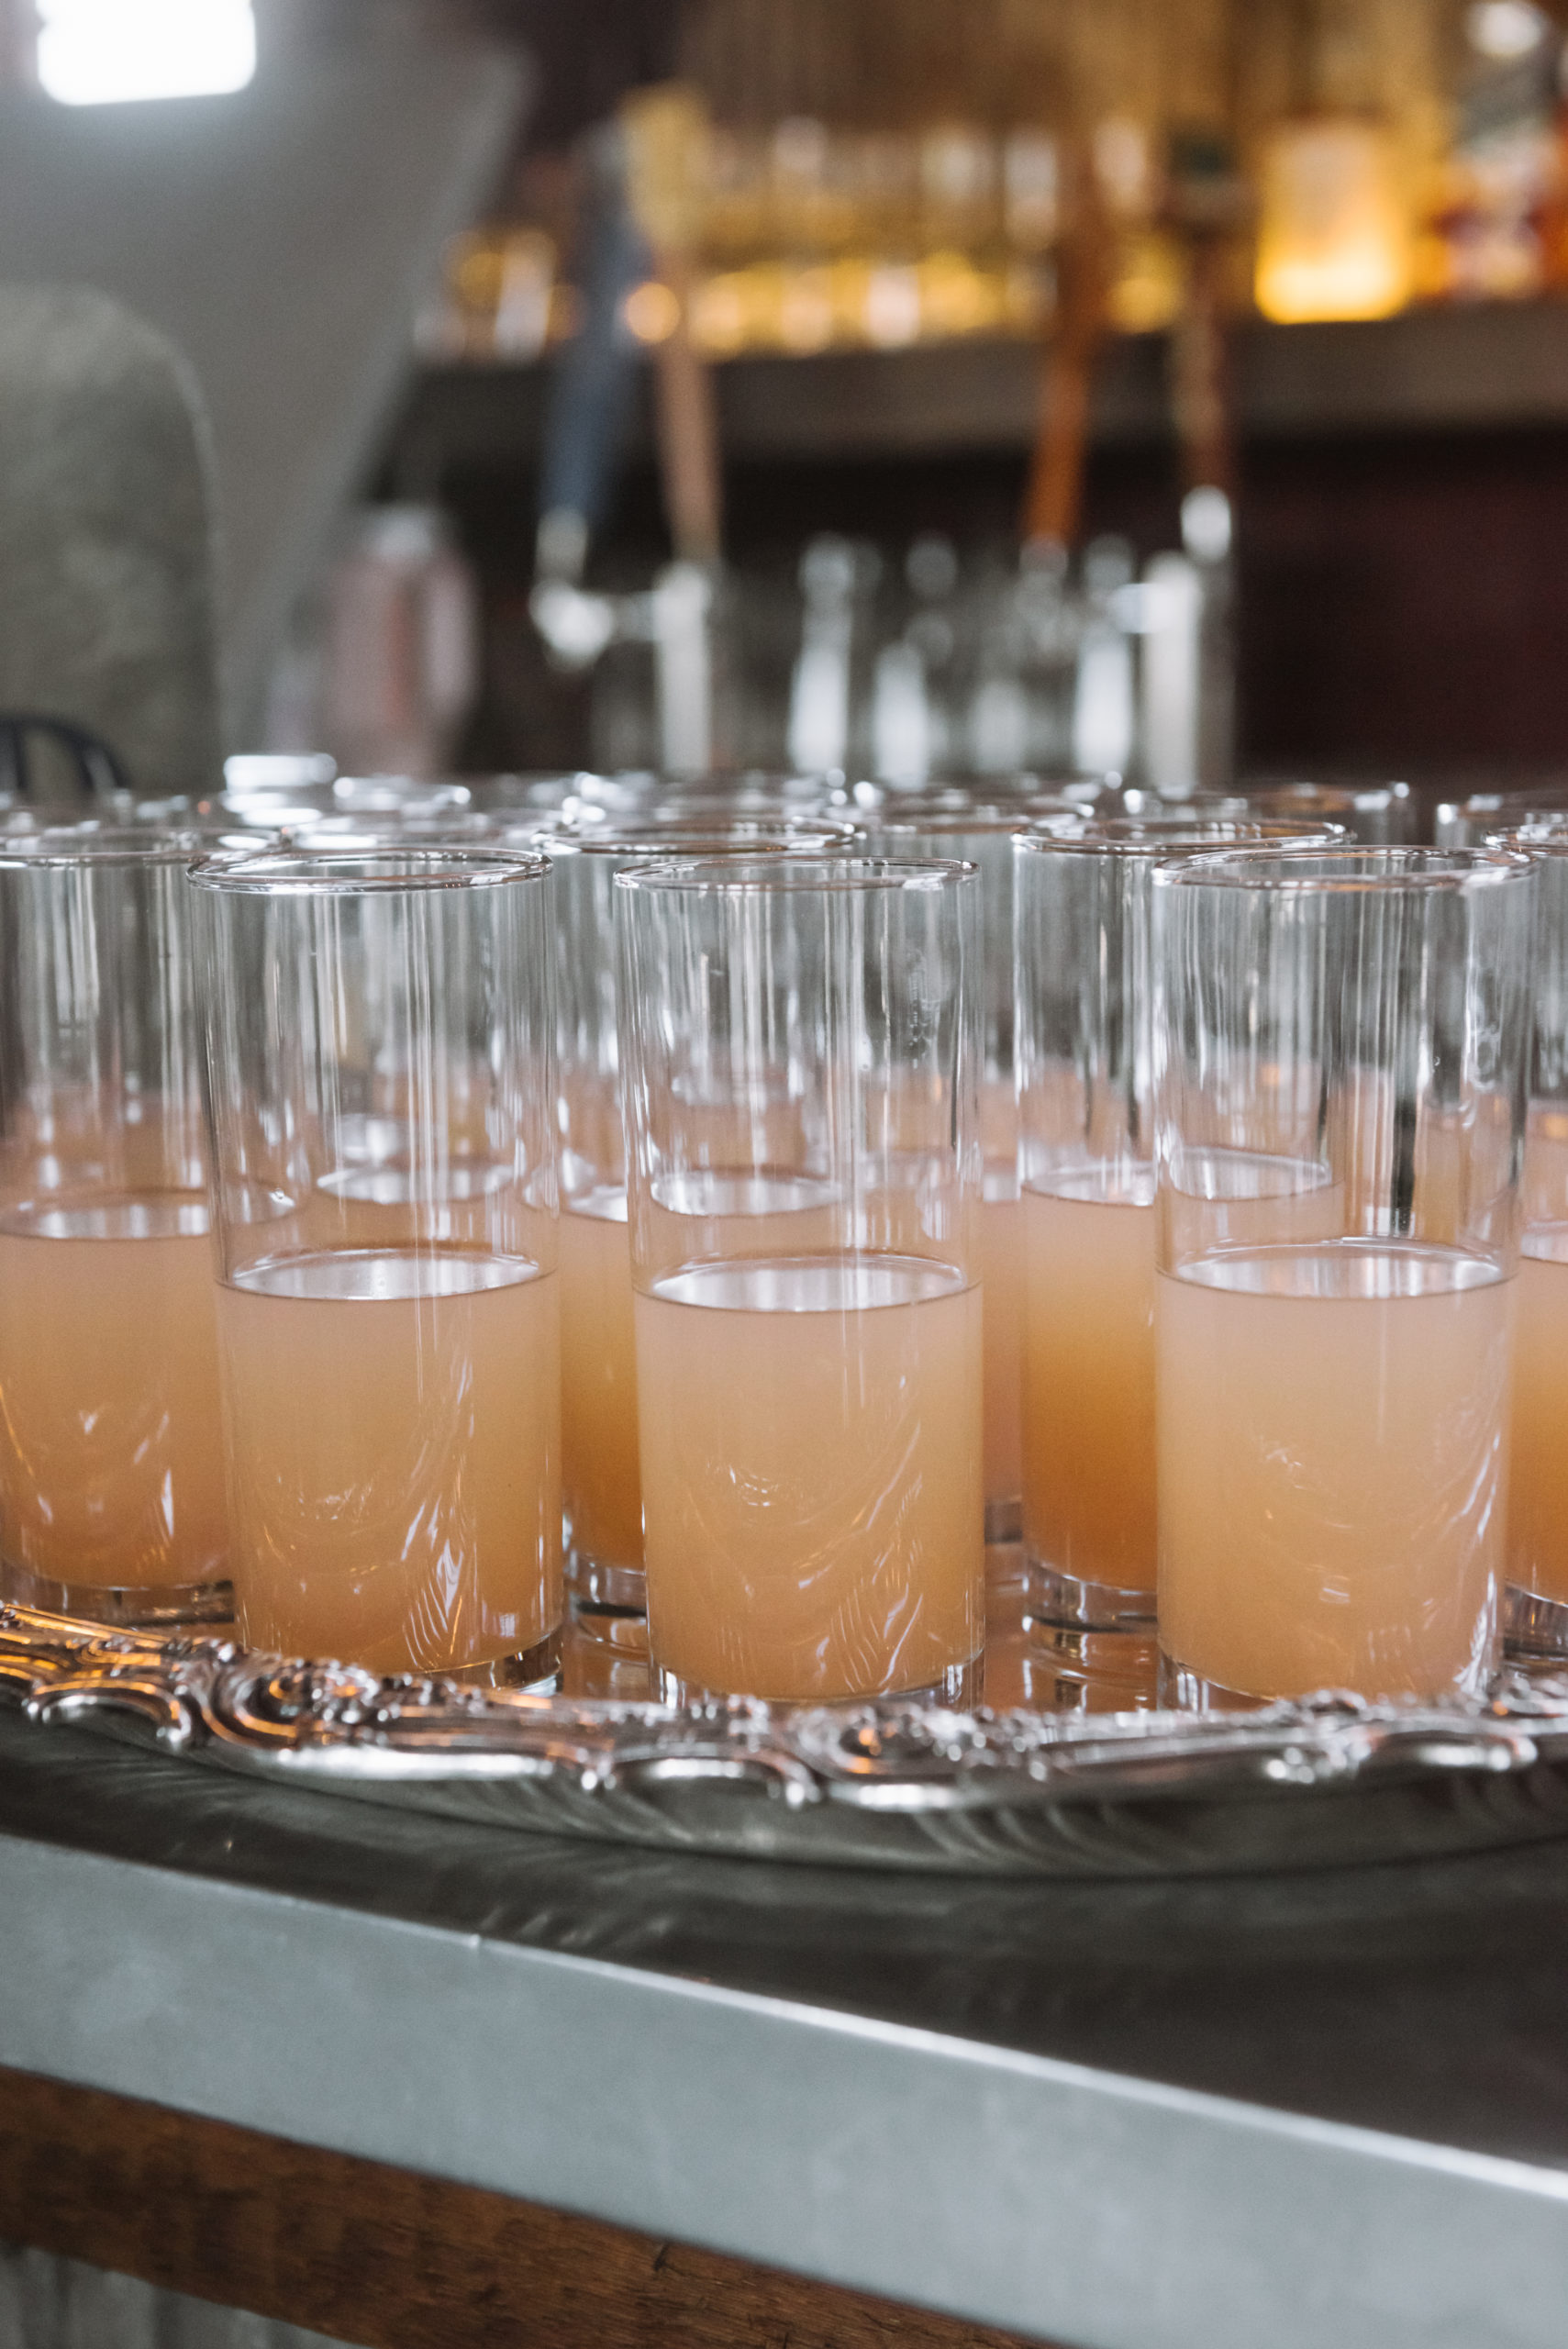 Detail of the pink-orange signature cocktail "Torre de Palma". There are multiple of them set atop a silver tray on the bar counter.